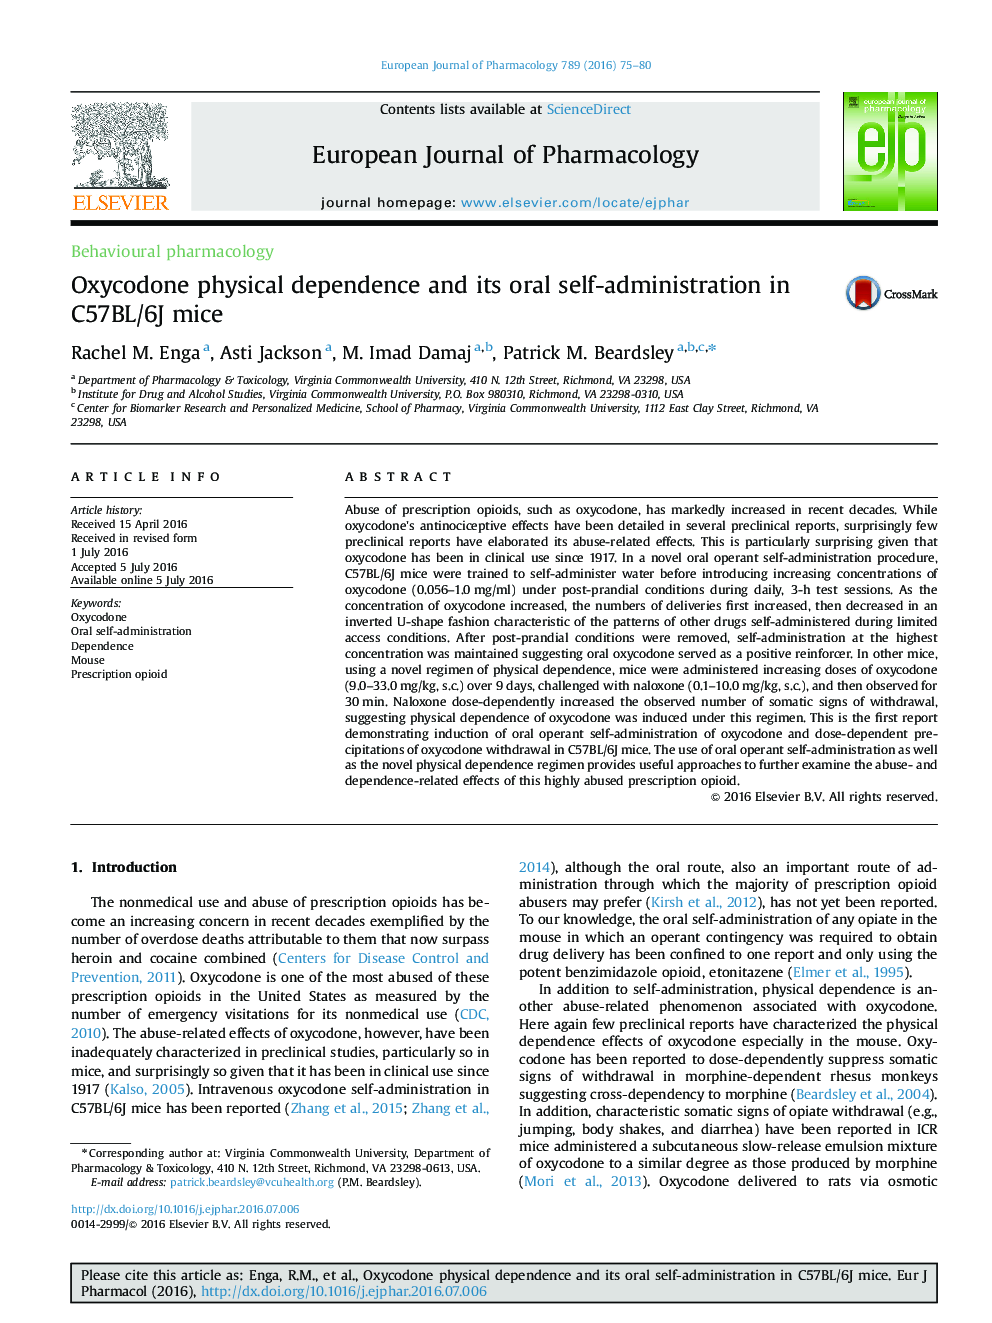 Oxycodone physical dependence and its oral self-administration in C57BL/6J mice